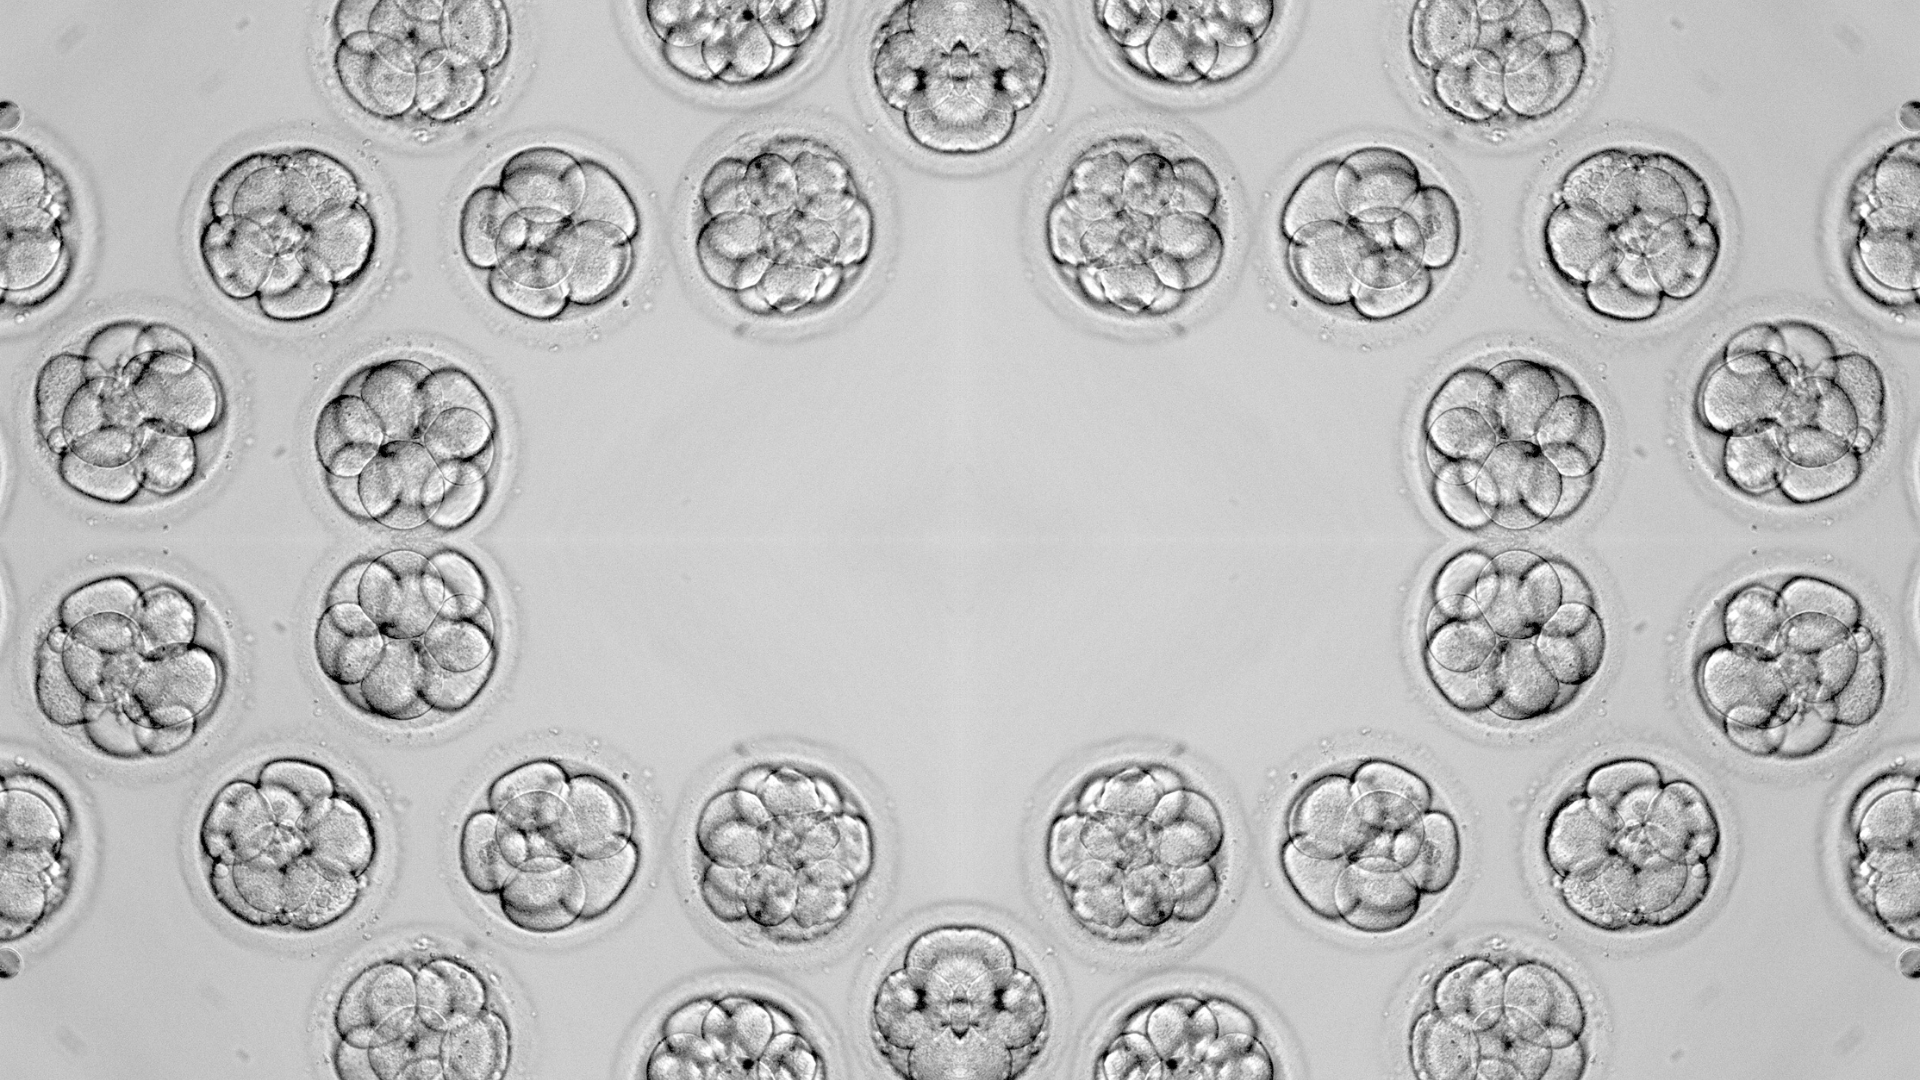 Mosaic of three-day-old IVF embryos. Image by AWelshLad on Canva